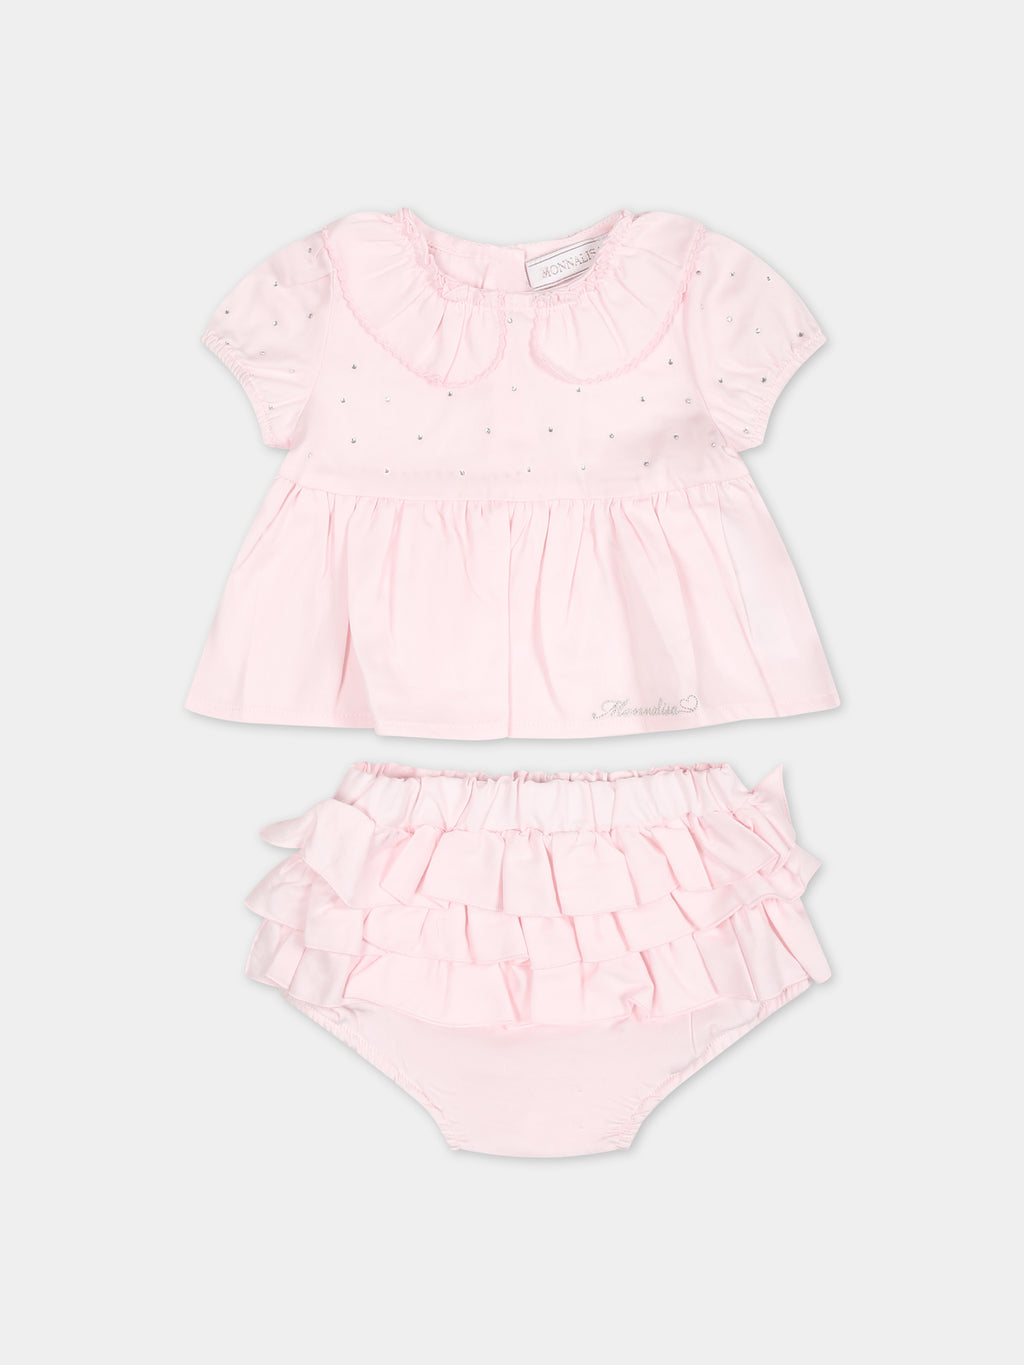 Pink dress for baby girl with rhinestones